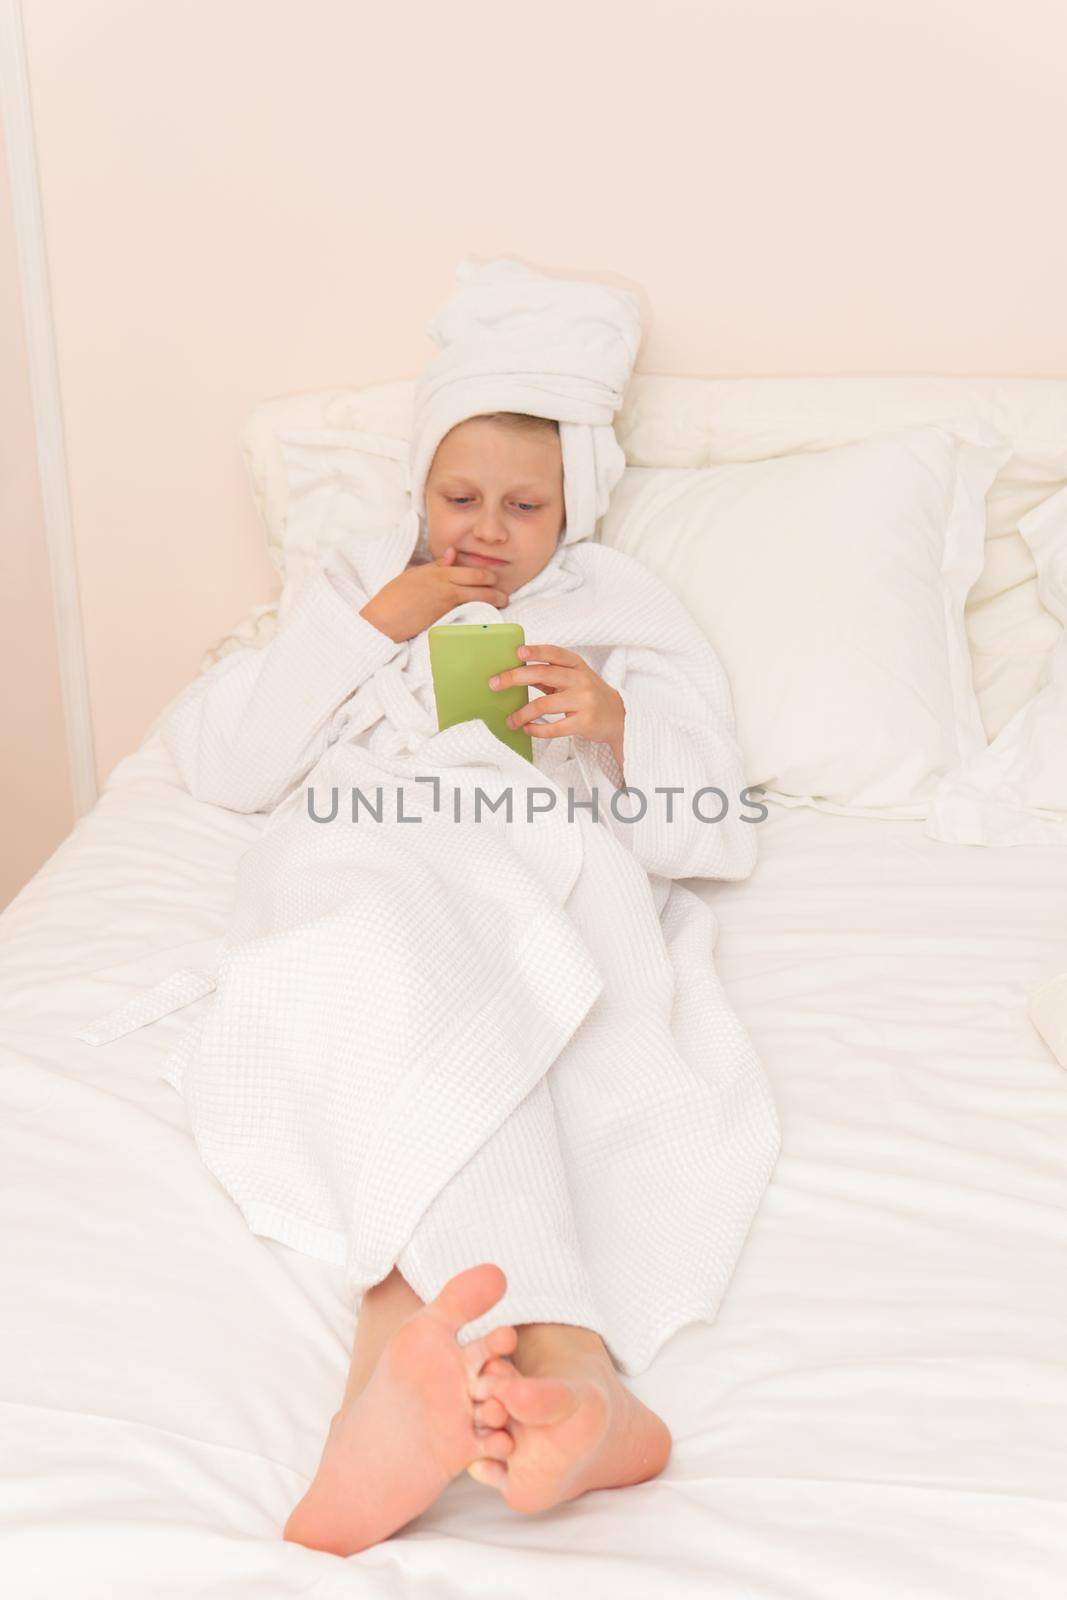 Bathrobe white portrait cell girl cute hygiene morning people lifestyle, from young bath in skin and style towel, background cheerful. Fun funny fashion, by 89167702191